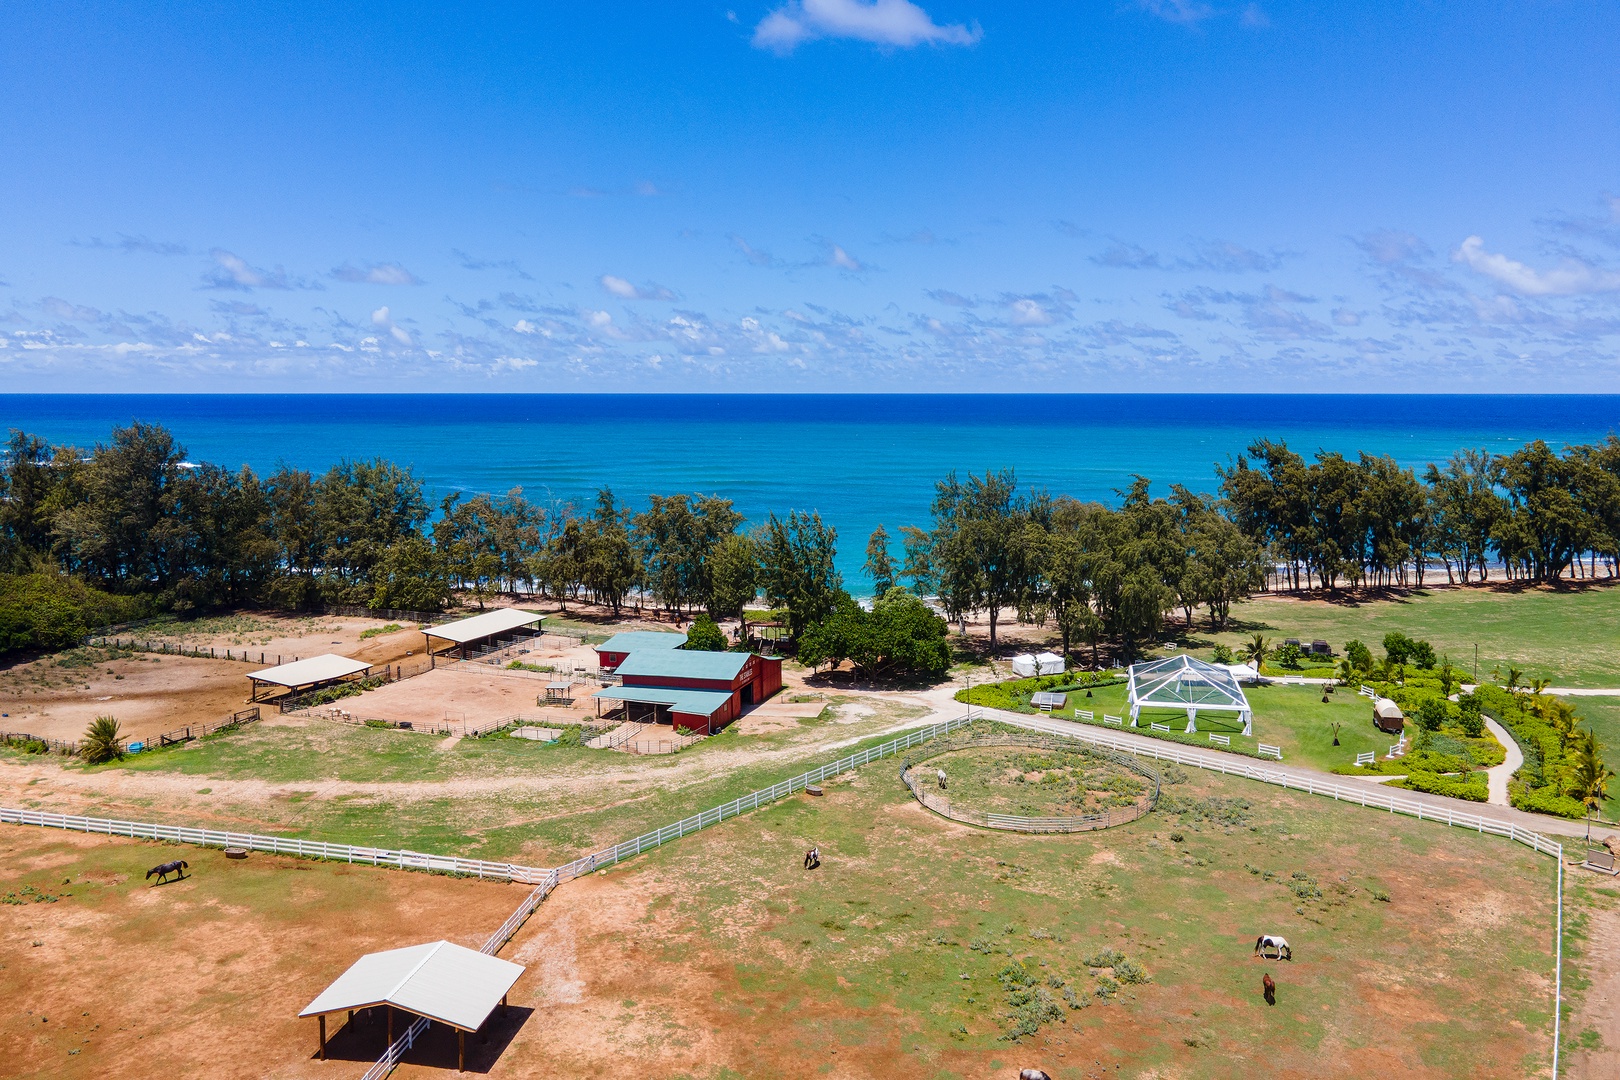 Kahuku Vacation Rentals, Kuilima Estates West #85 - Stables and Oceans views within walking distance.